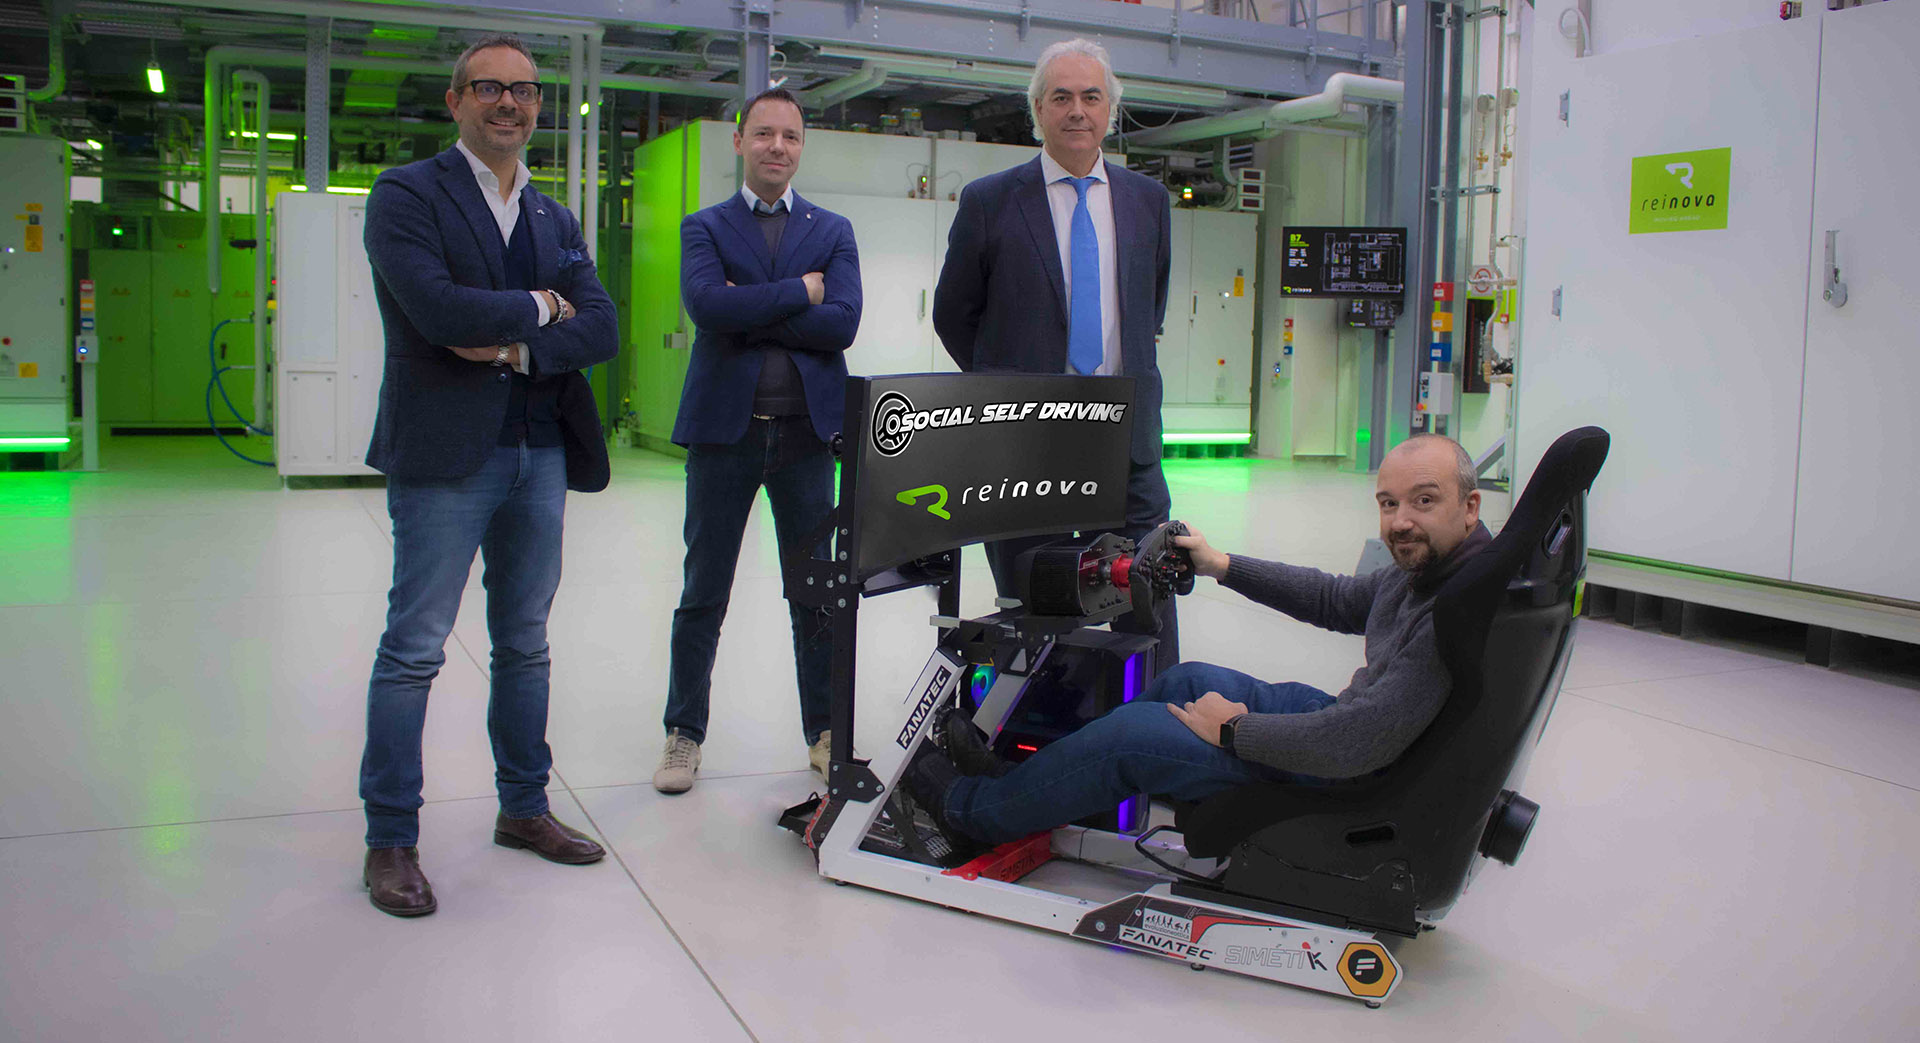 Reinova and Social Self Driving sign an agreement for the development of an innovative new Self-Driving and Semi-Self-Driving system